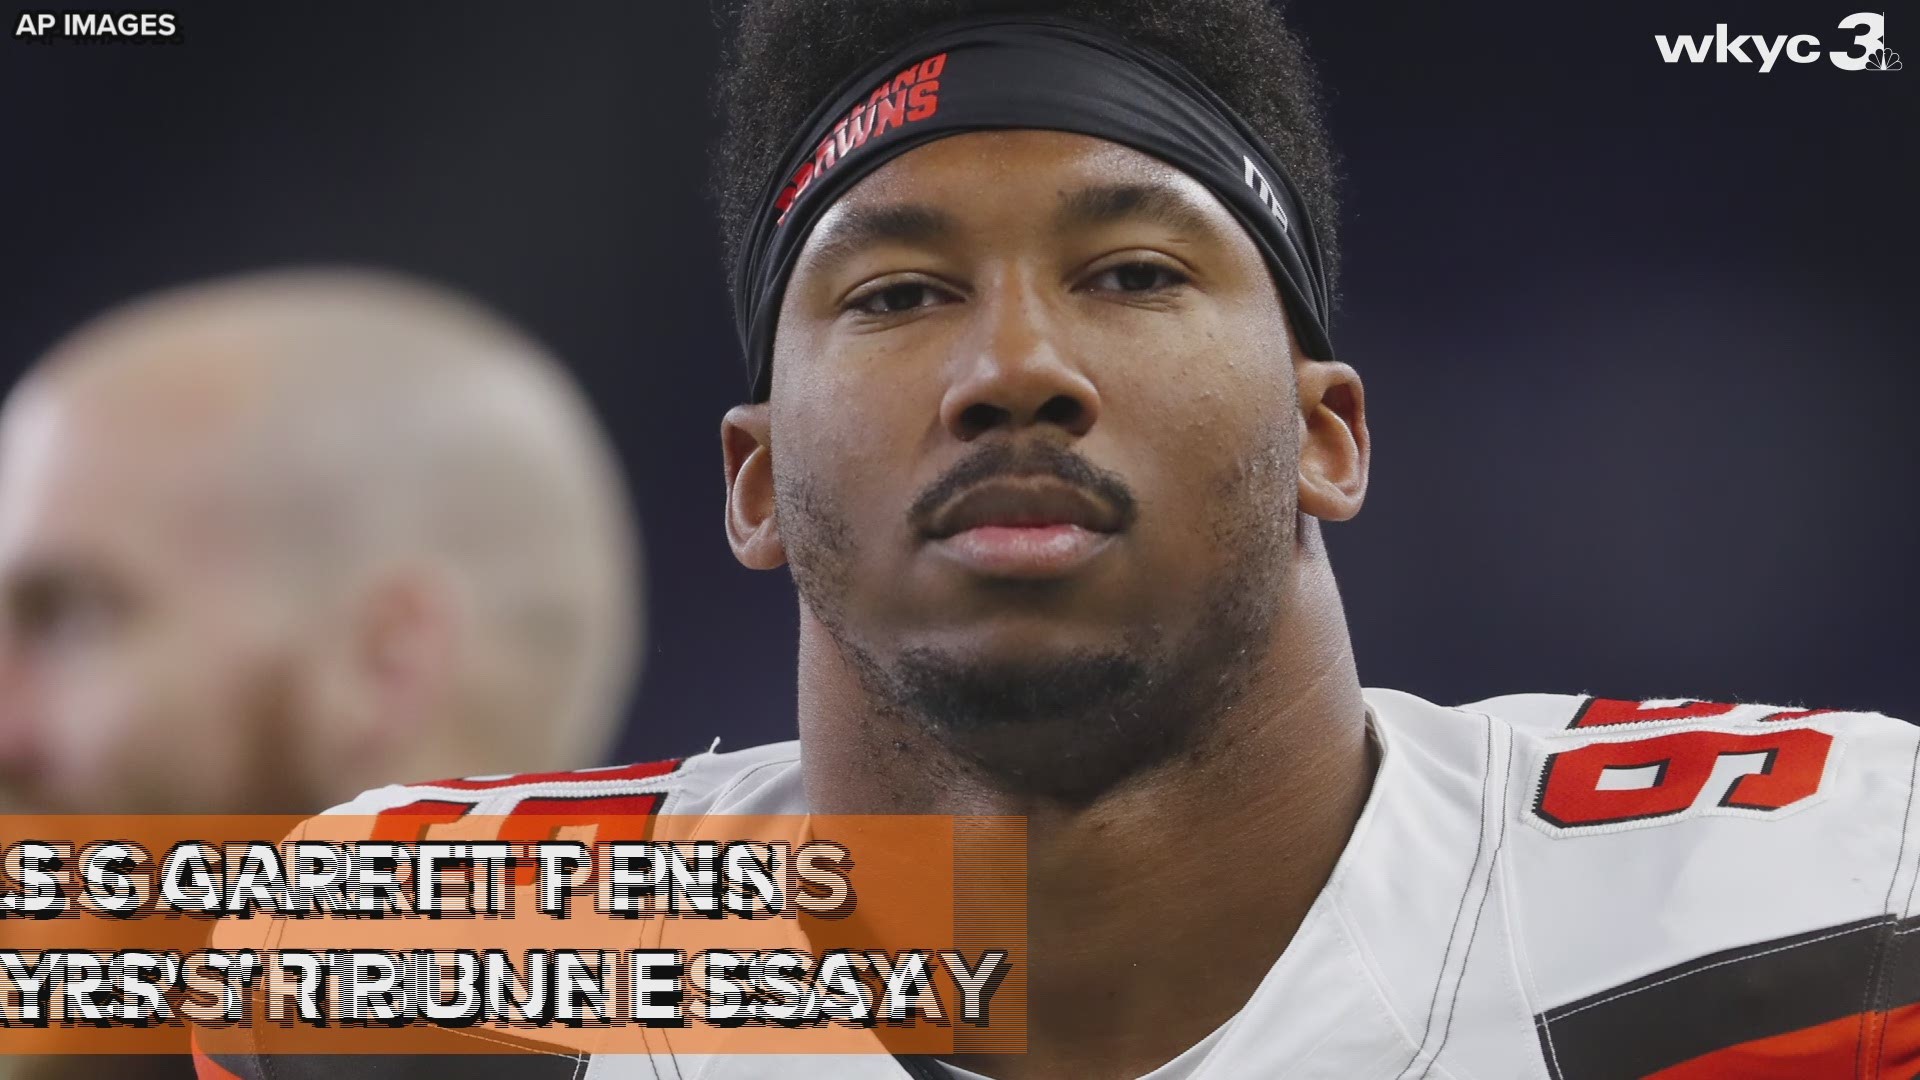 "We're here."  On Thursday, The Players' Tribune released an essay in which Cleveland Browns defensive end Myles Garrett discussed his team's lofty expectations.